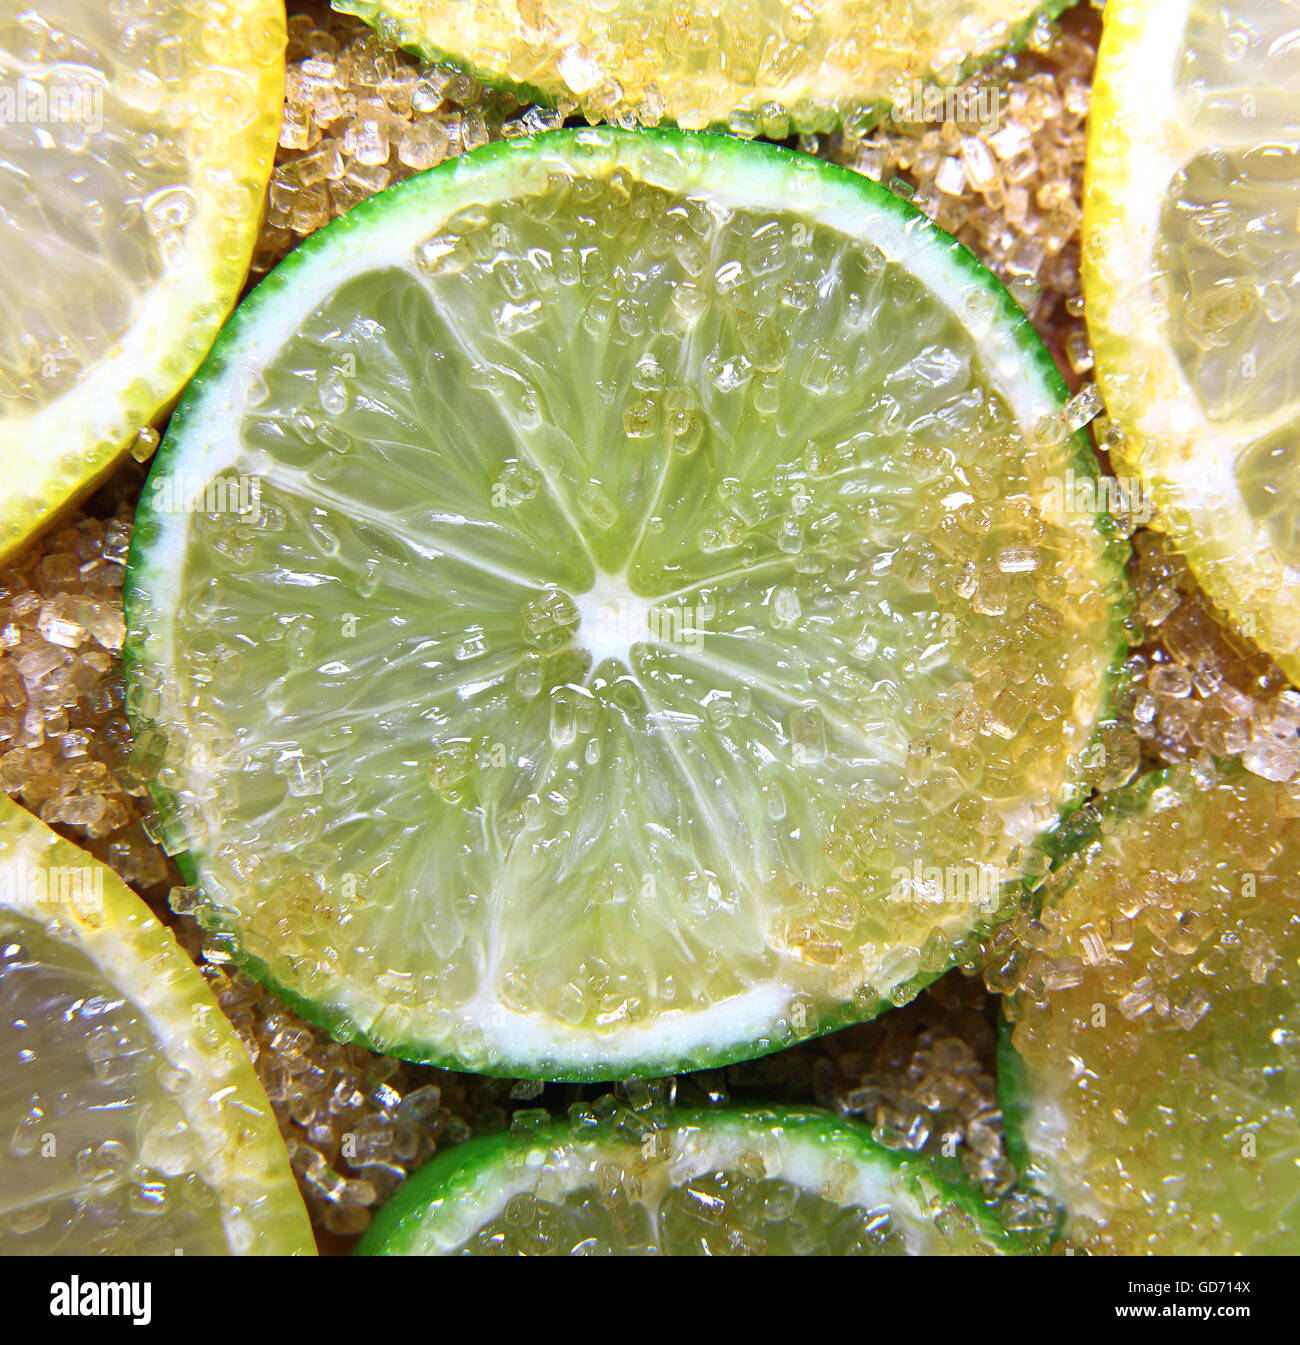 view on slices of limes and lemons mixed with cane sugar placed flat on the ground Stock Photo